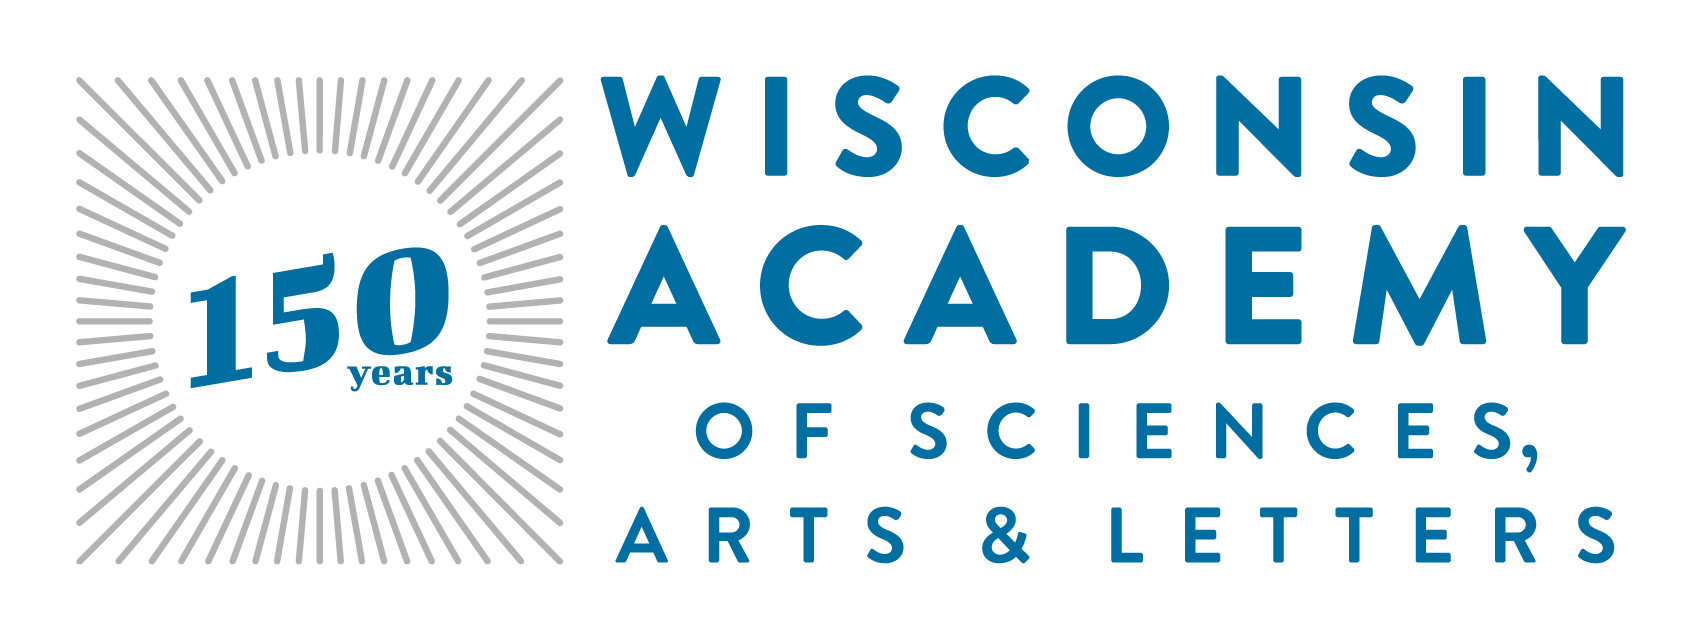 Wisconsin Academy of Sciences, Arts & Letters logo